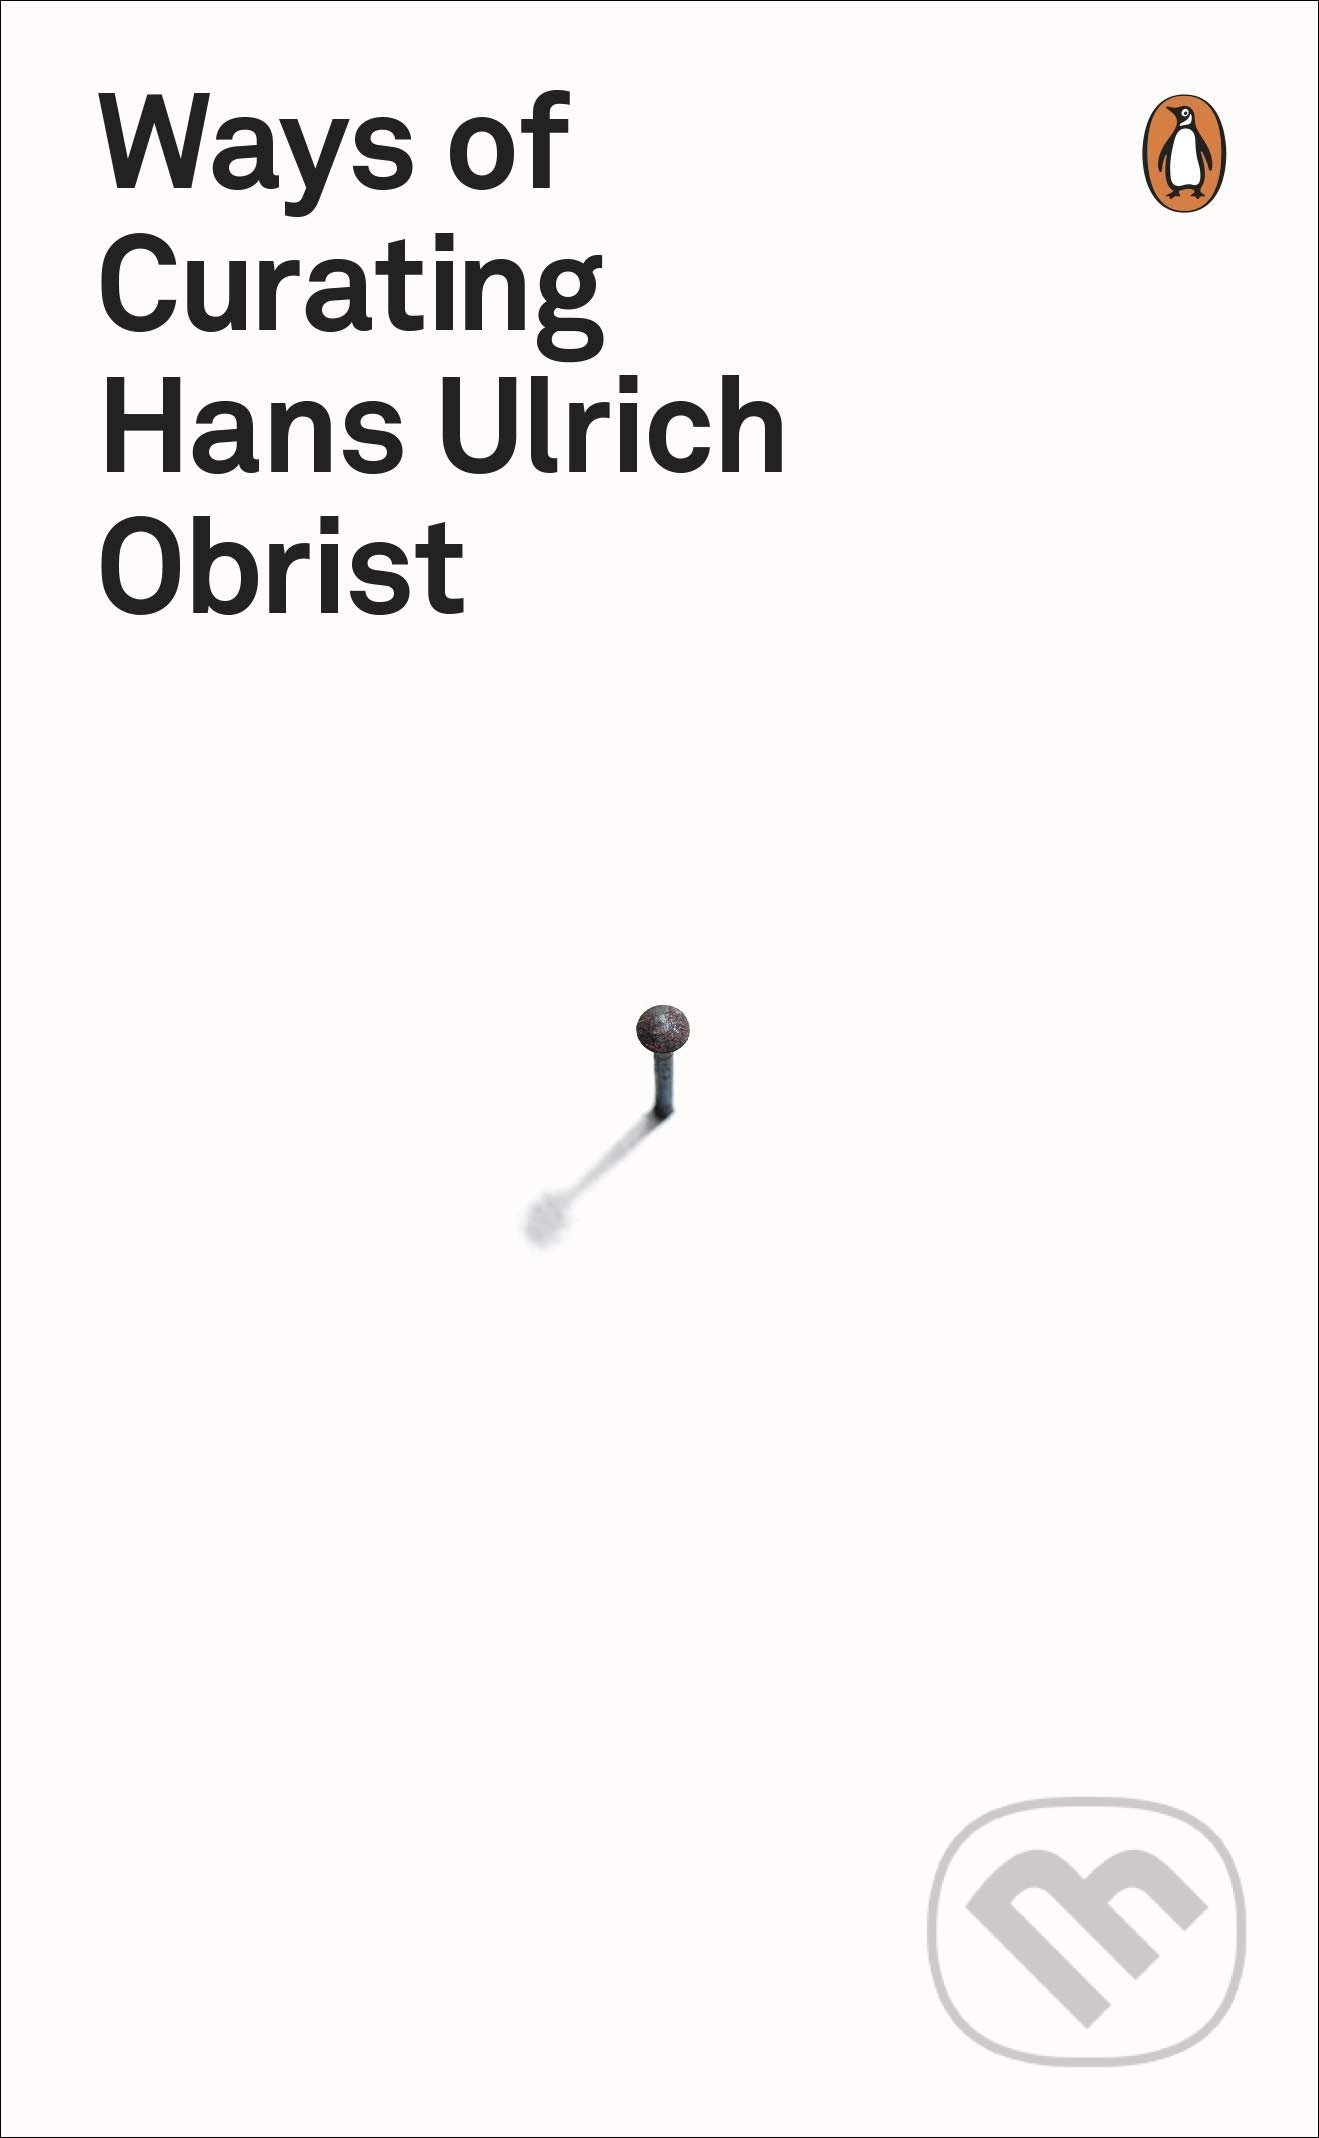 Ways of Curating - Hans Ulrich Obrist, Penguin Books, 2015